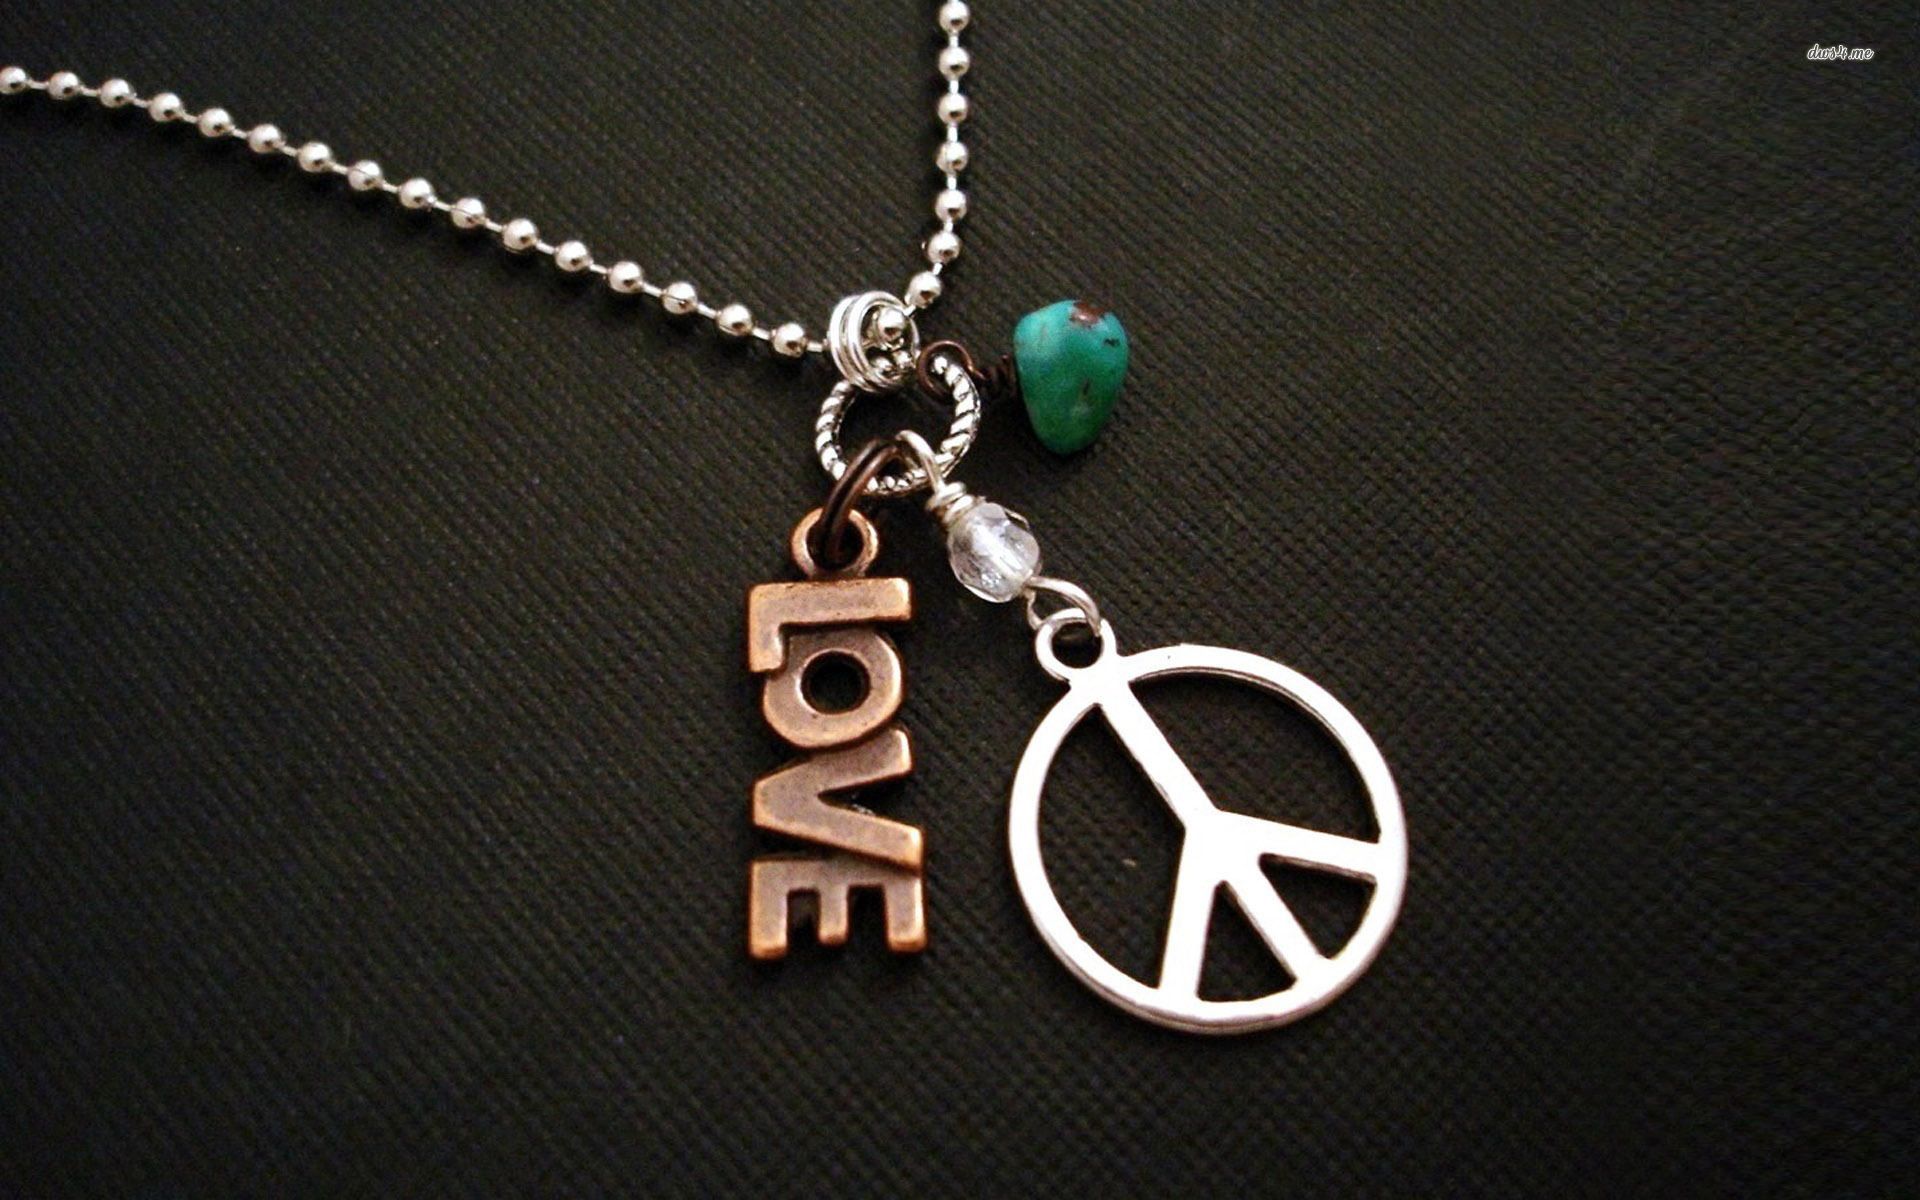 Love and Peace wallpaper - Photography wallpapers